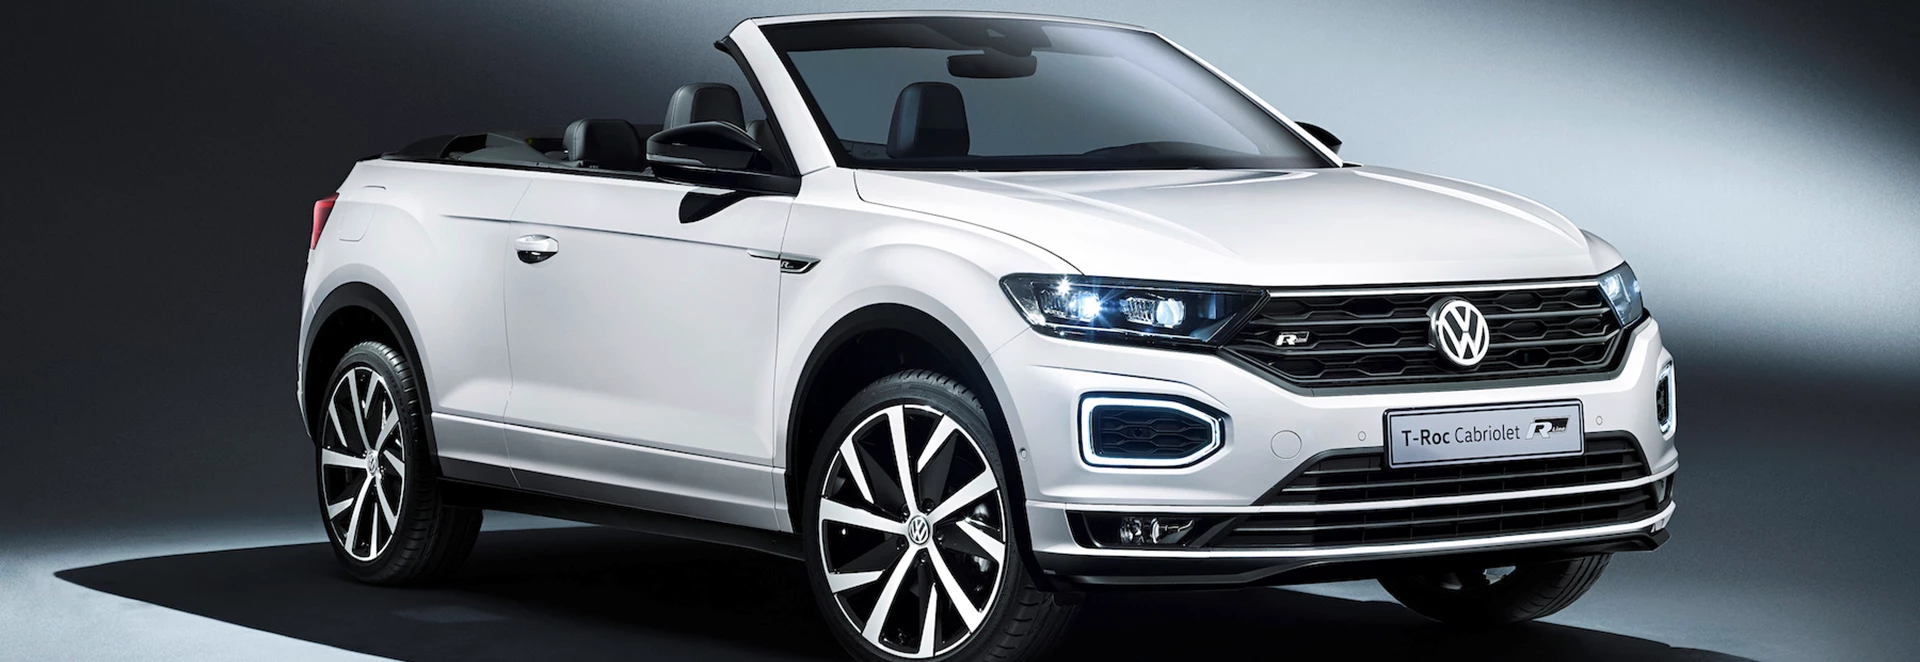 Volkswagen T-Roc crossover is getting a convertible version